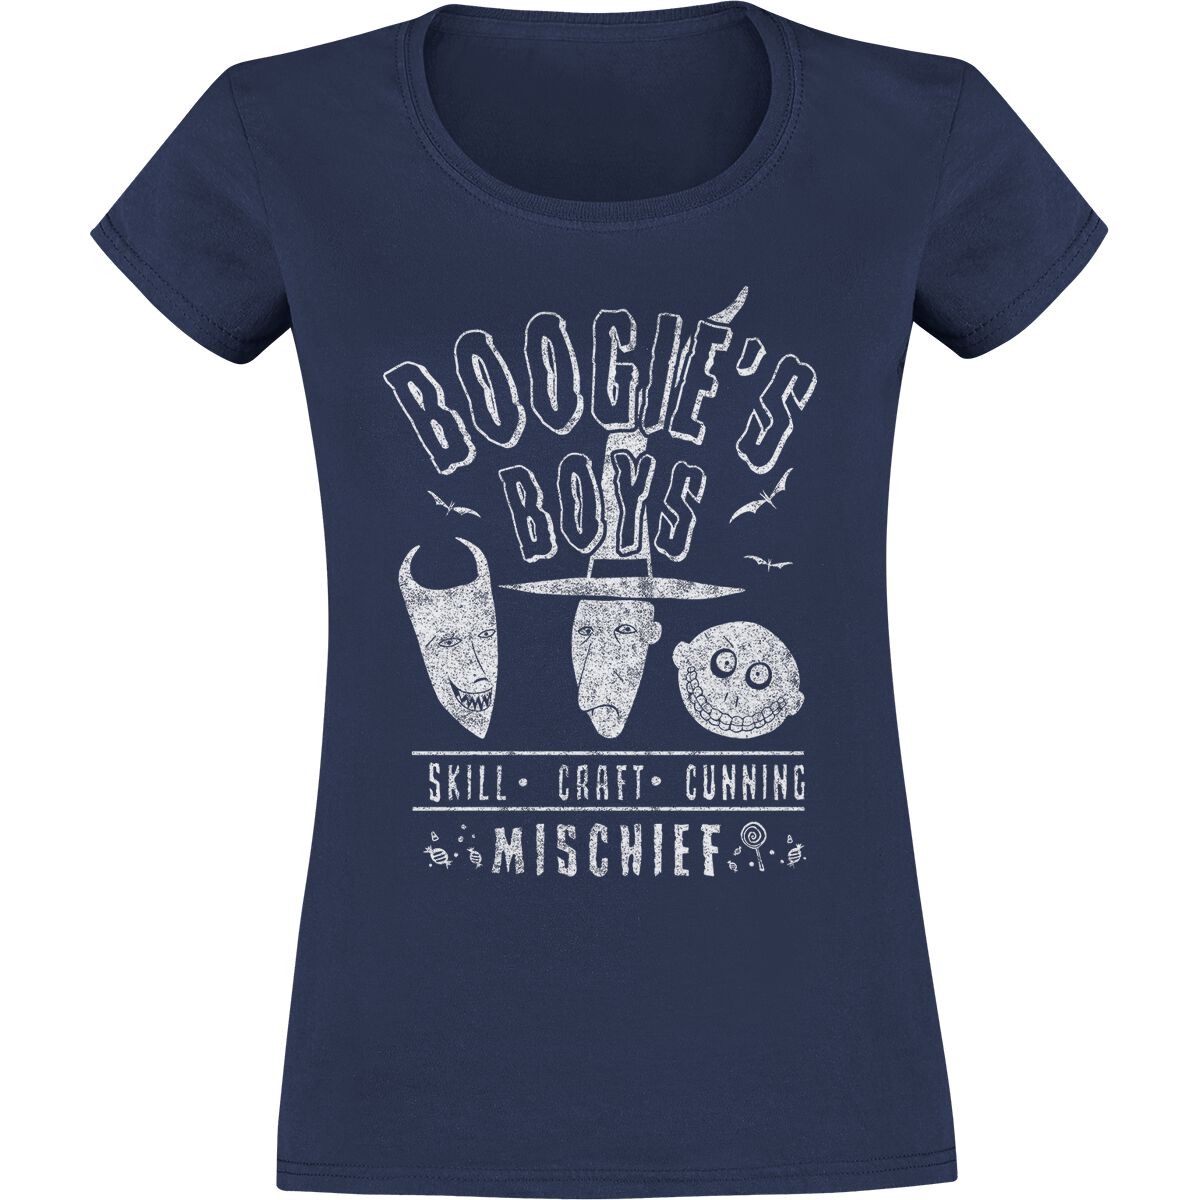 The Nightmare Before Christmas Boogie's Boys T-Shirt blue